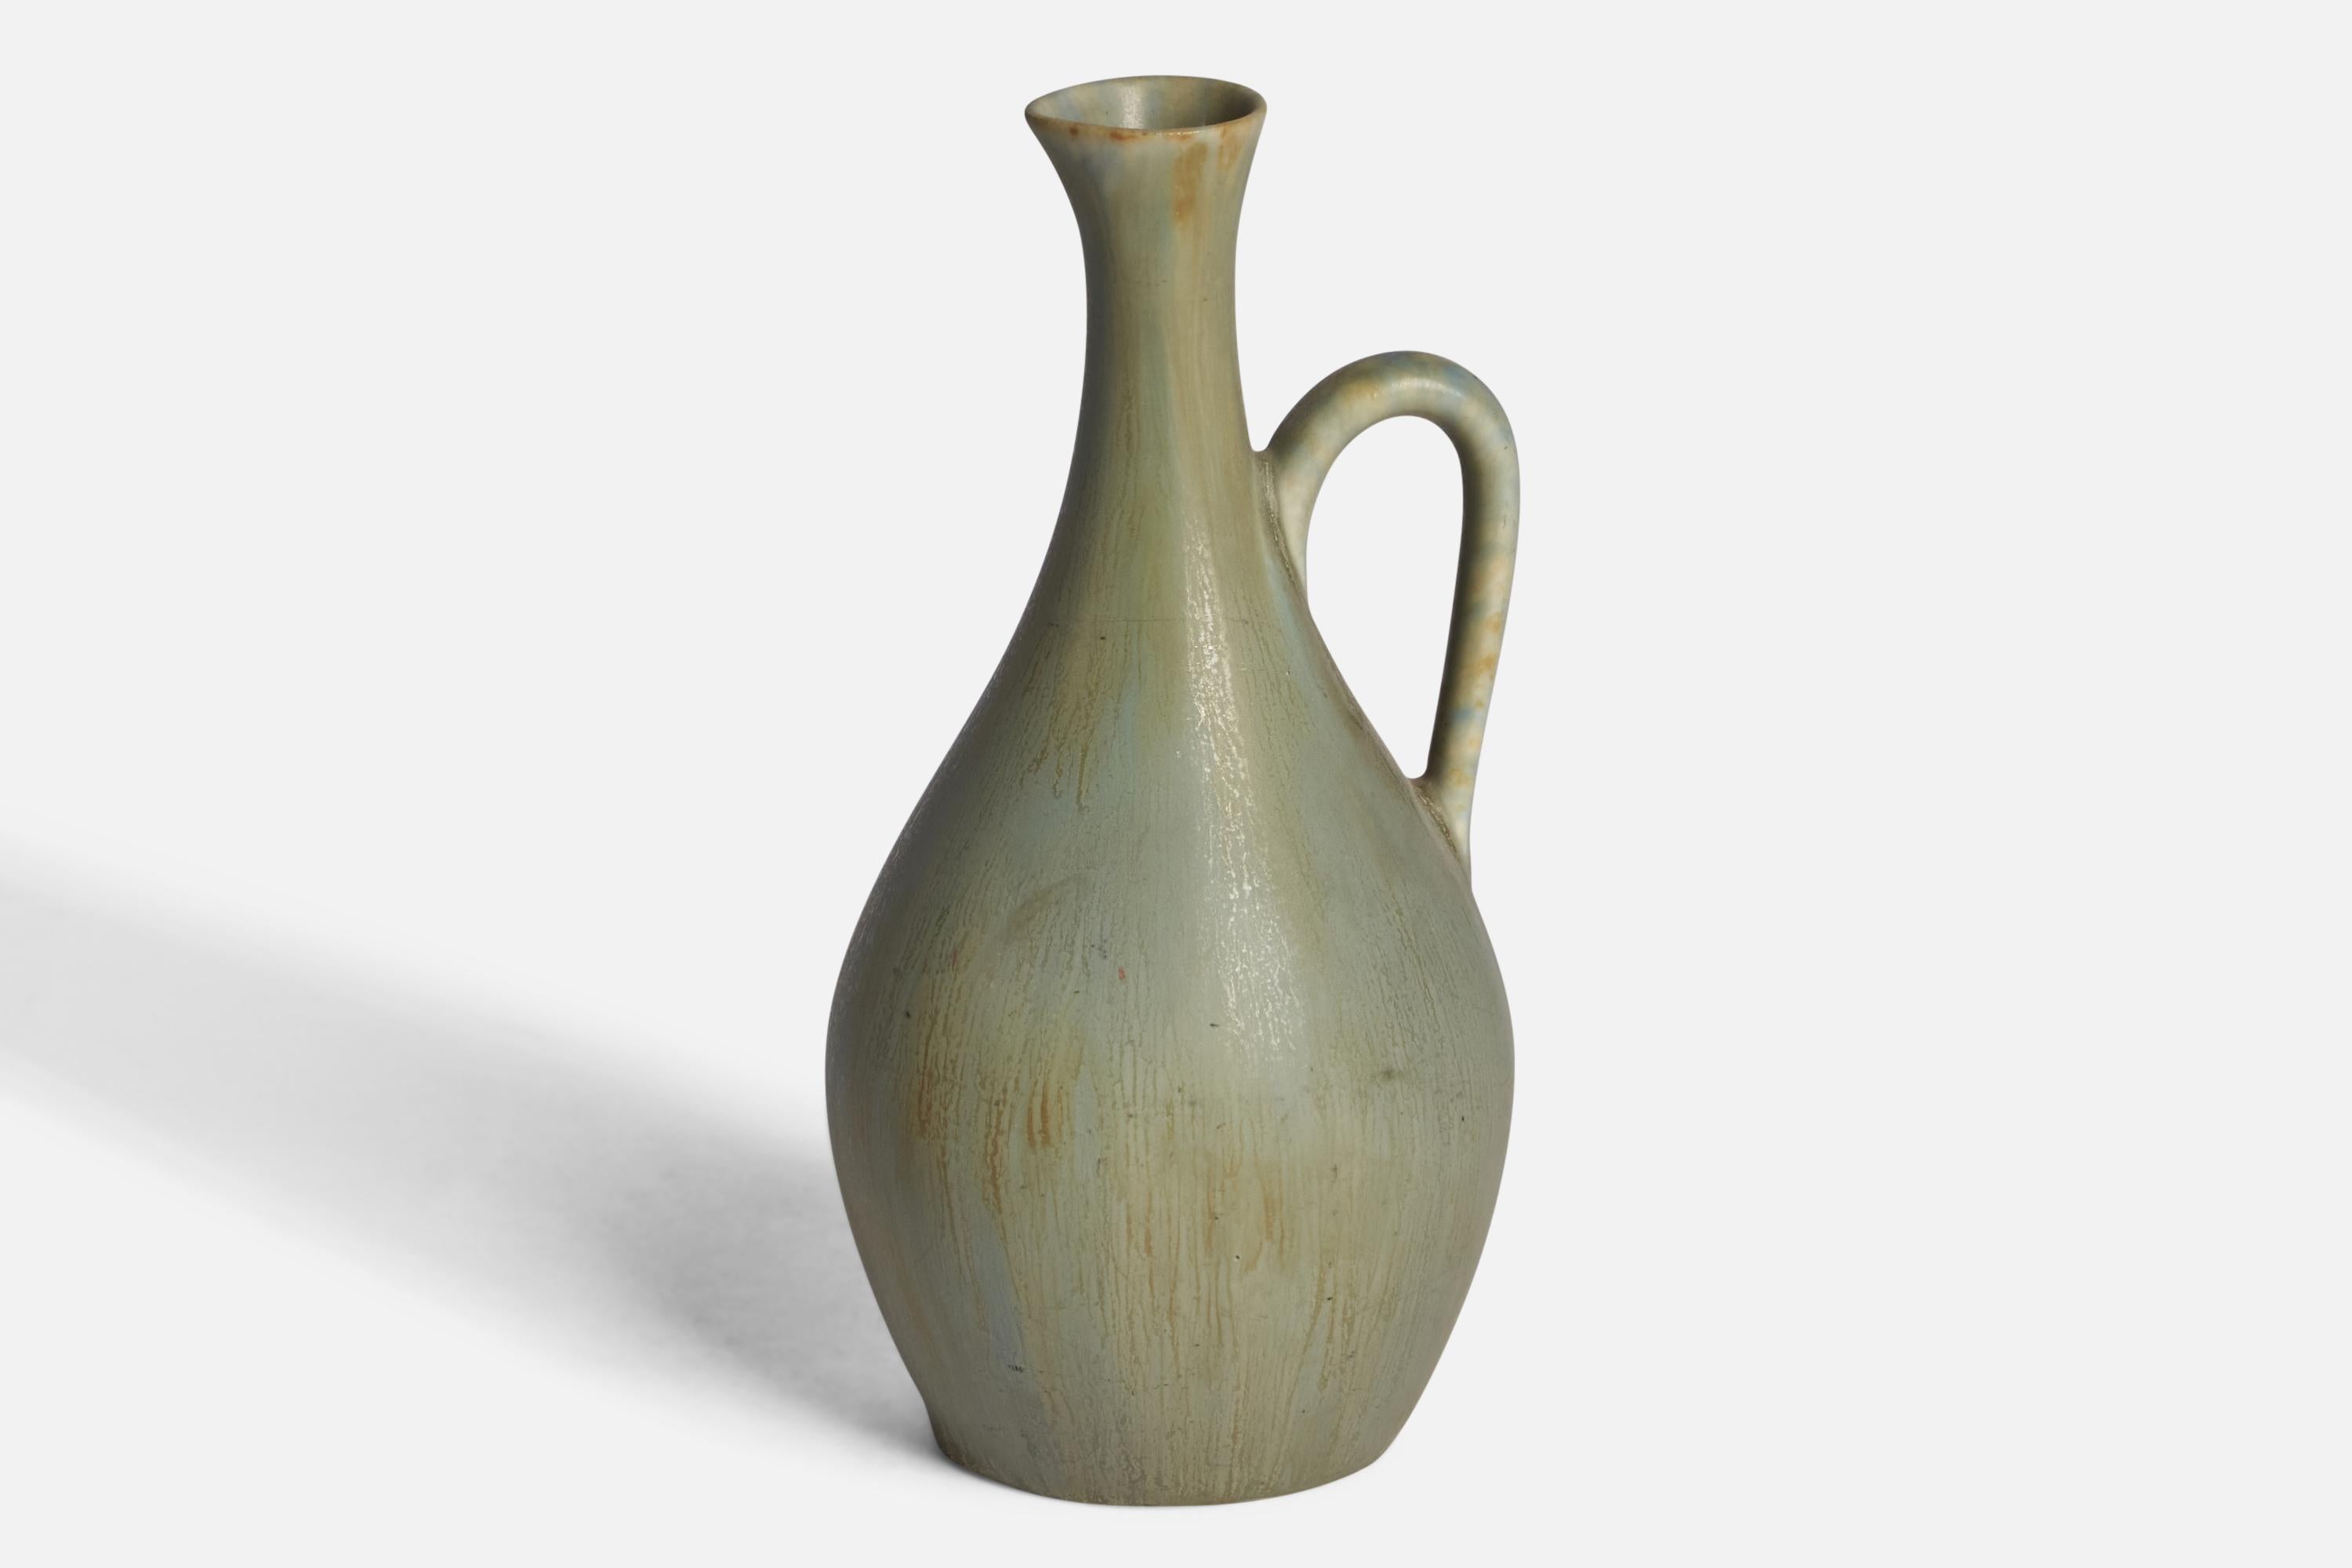 A green stoneware vase or pitcher designed by Carl-Harry Stålhane and produced by Rörstrand, Sweden, 1950s.